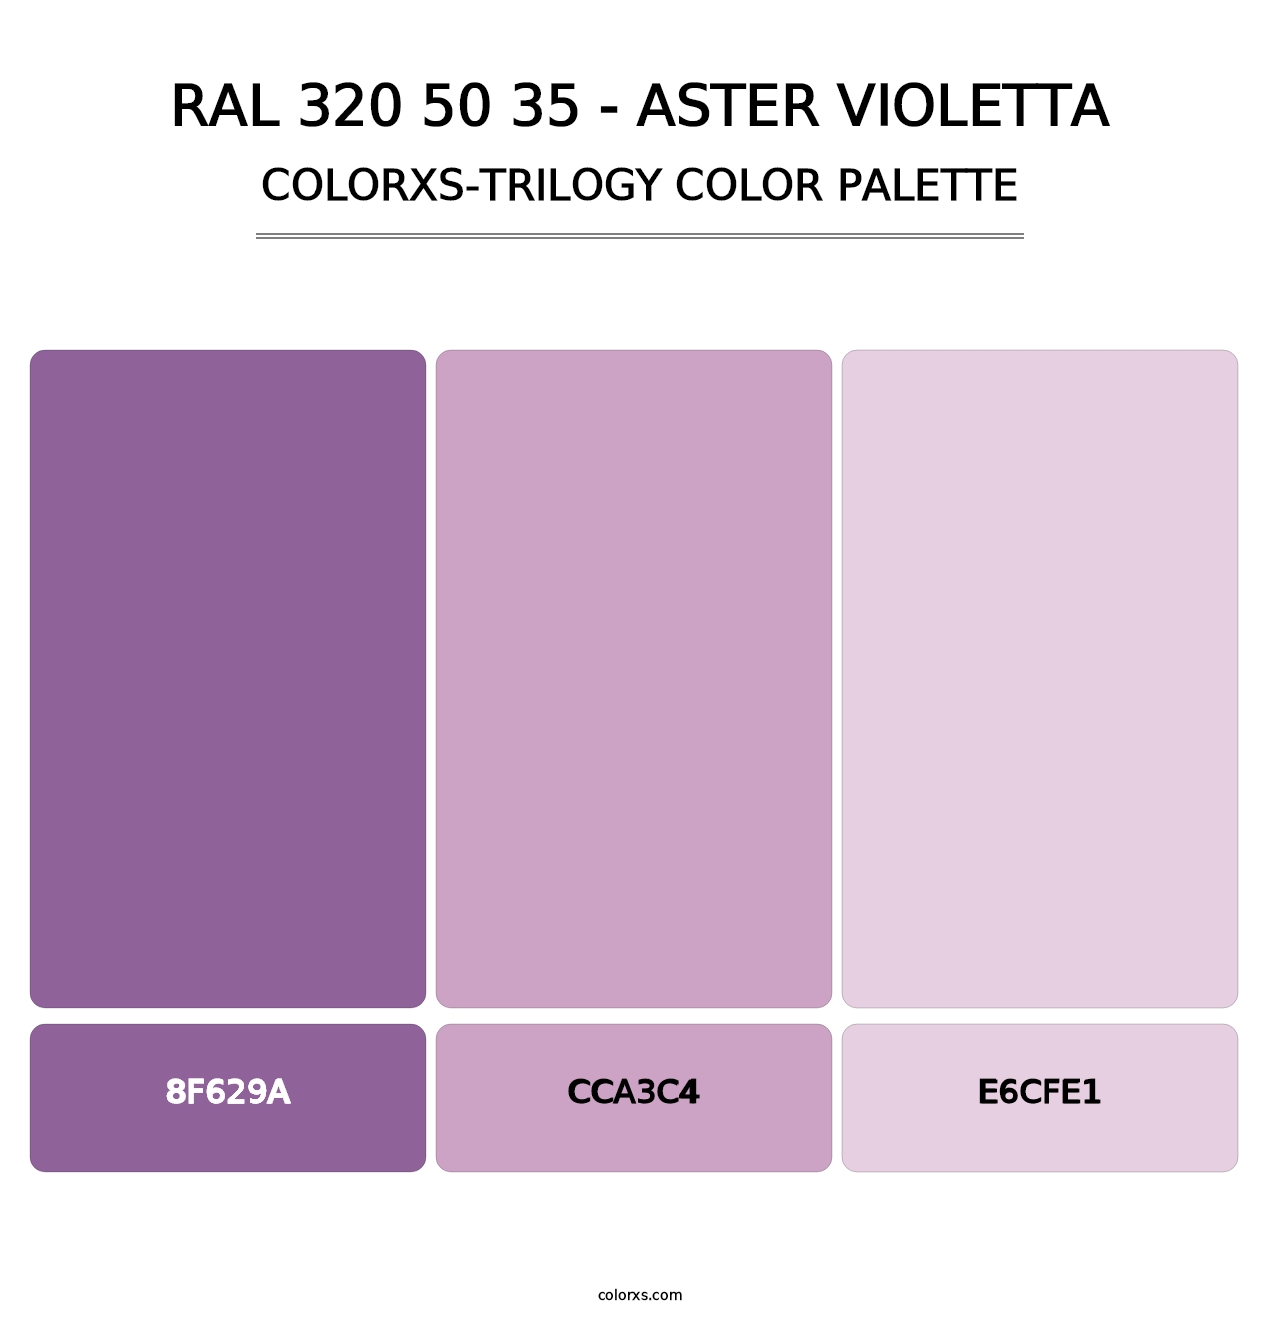 RAL 320 50 35 - Aster Violetta - Colorxs Trilogy Palette